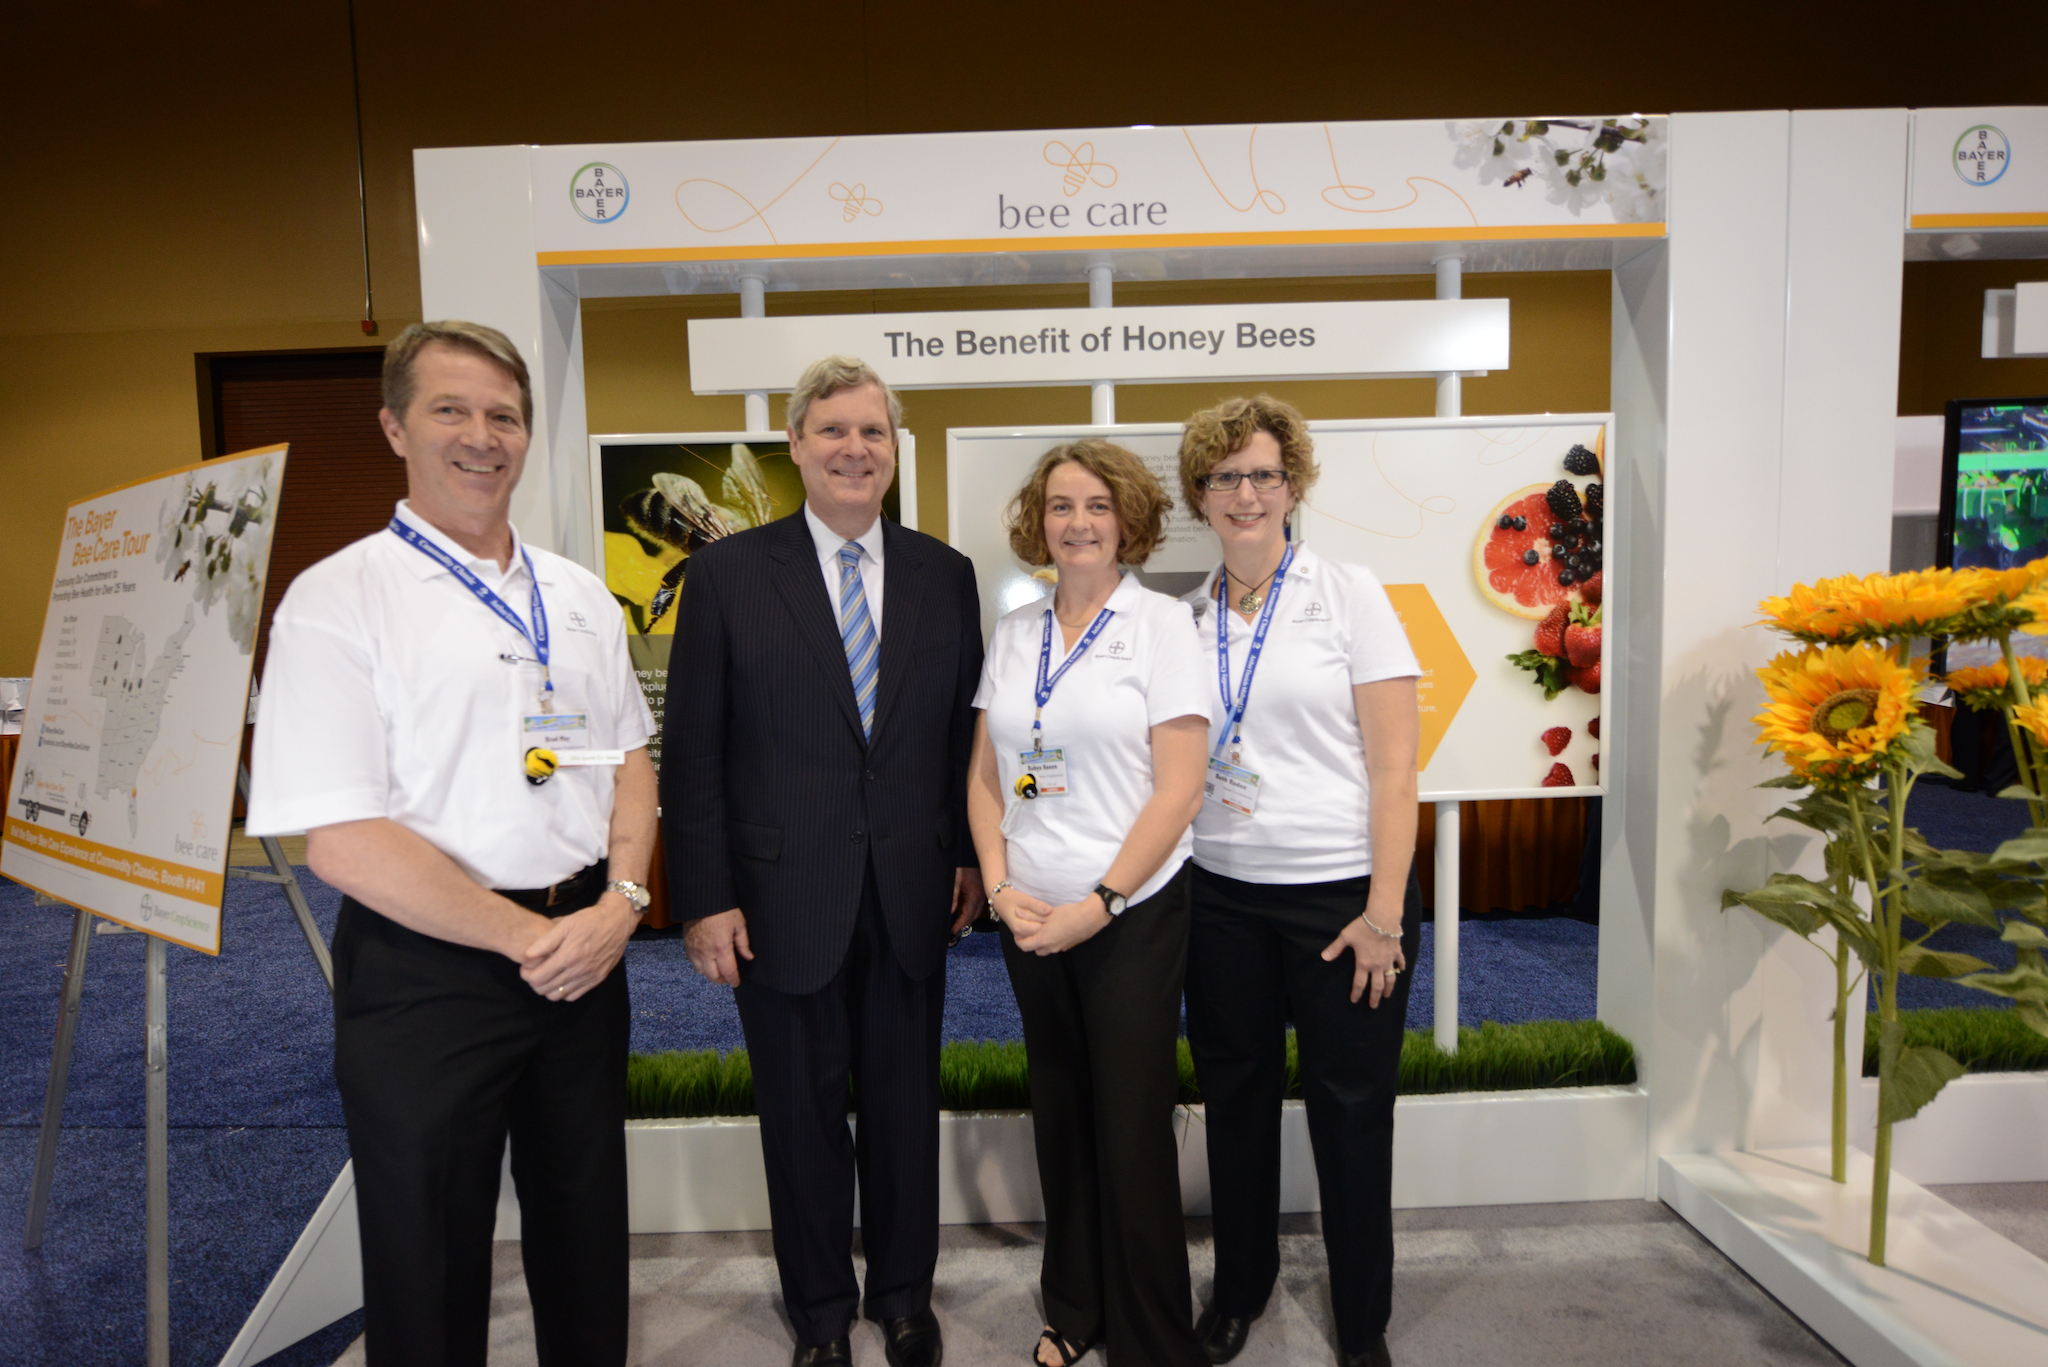 Secretary of Agriculture, Tom Vilsack, experiencing the Bee Care Tour exhibit with the Bayer CropScience North American Bee Health Team